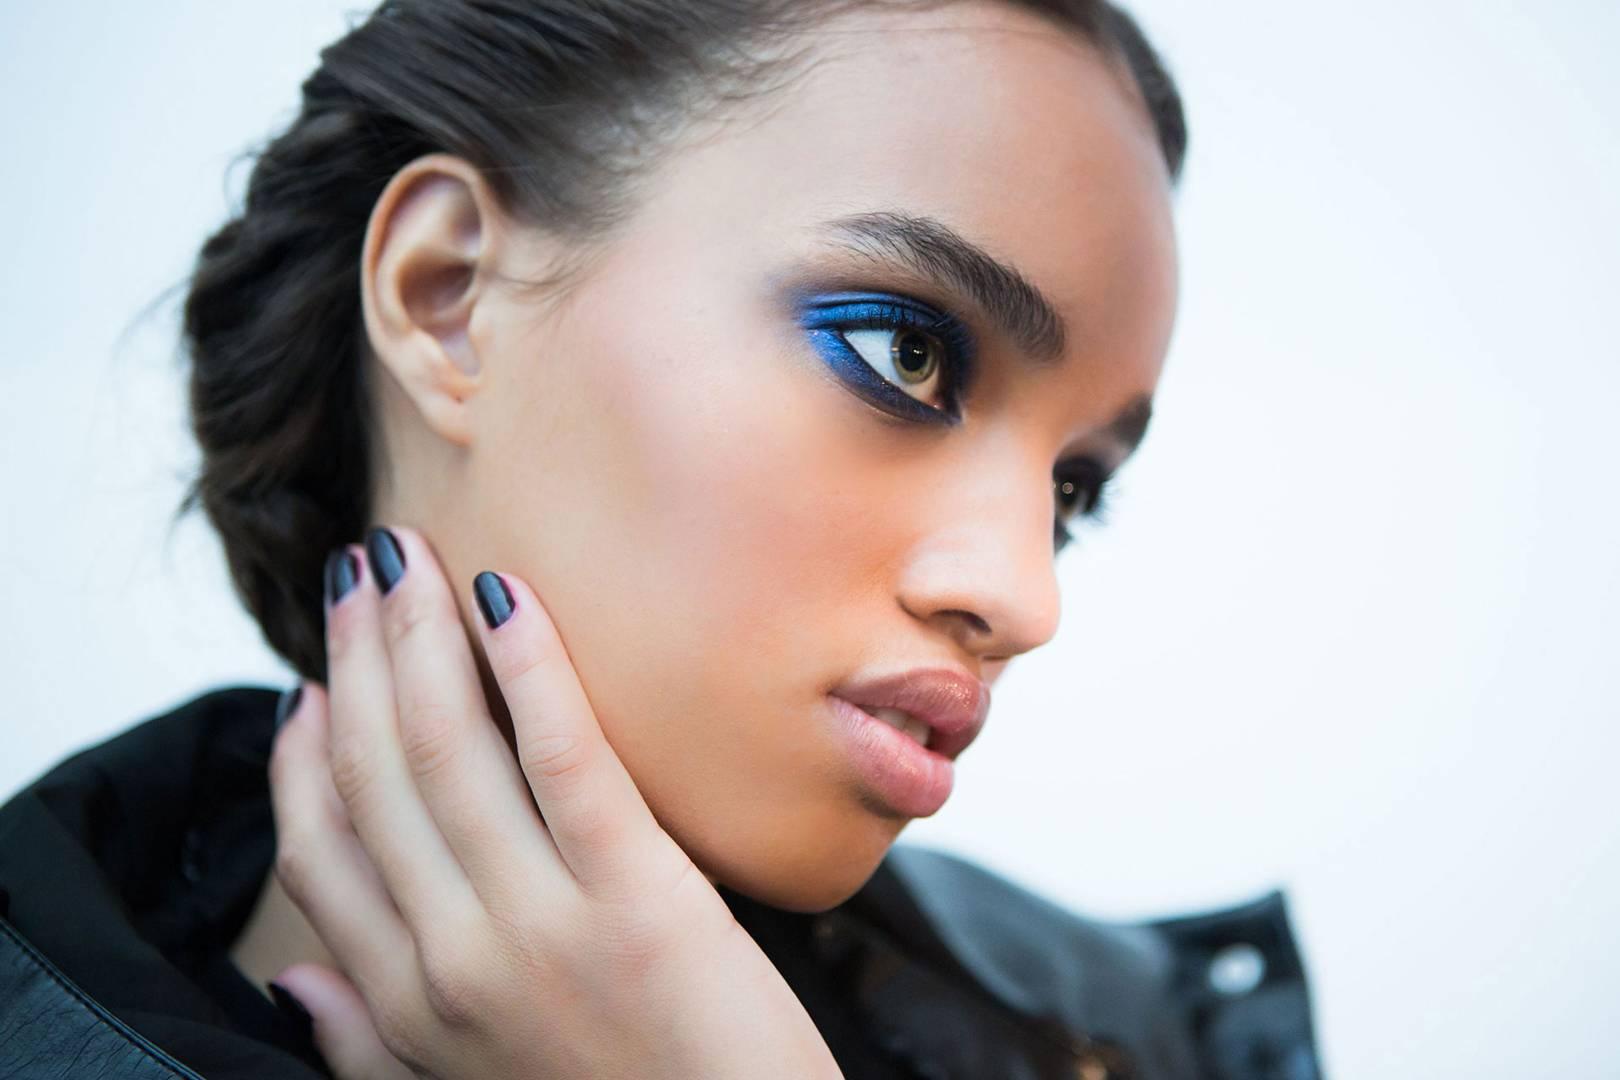 Eye Makeup With Turquoise Dress How To Apply Eyeshadow The Miss Vogue Guide British Vogue